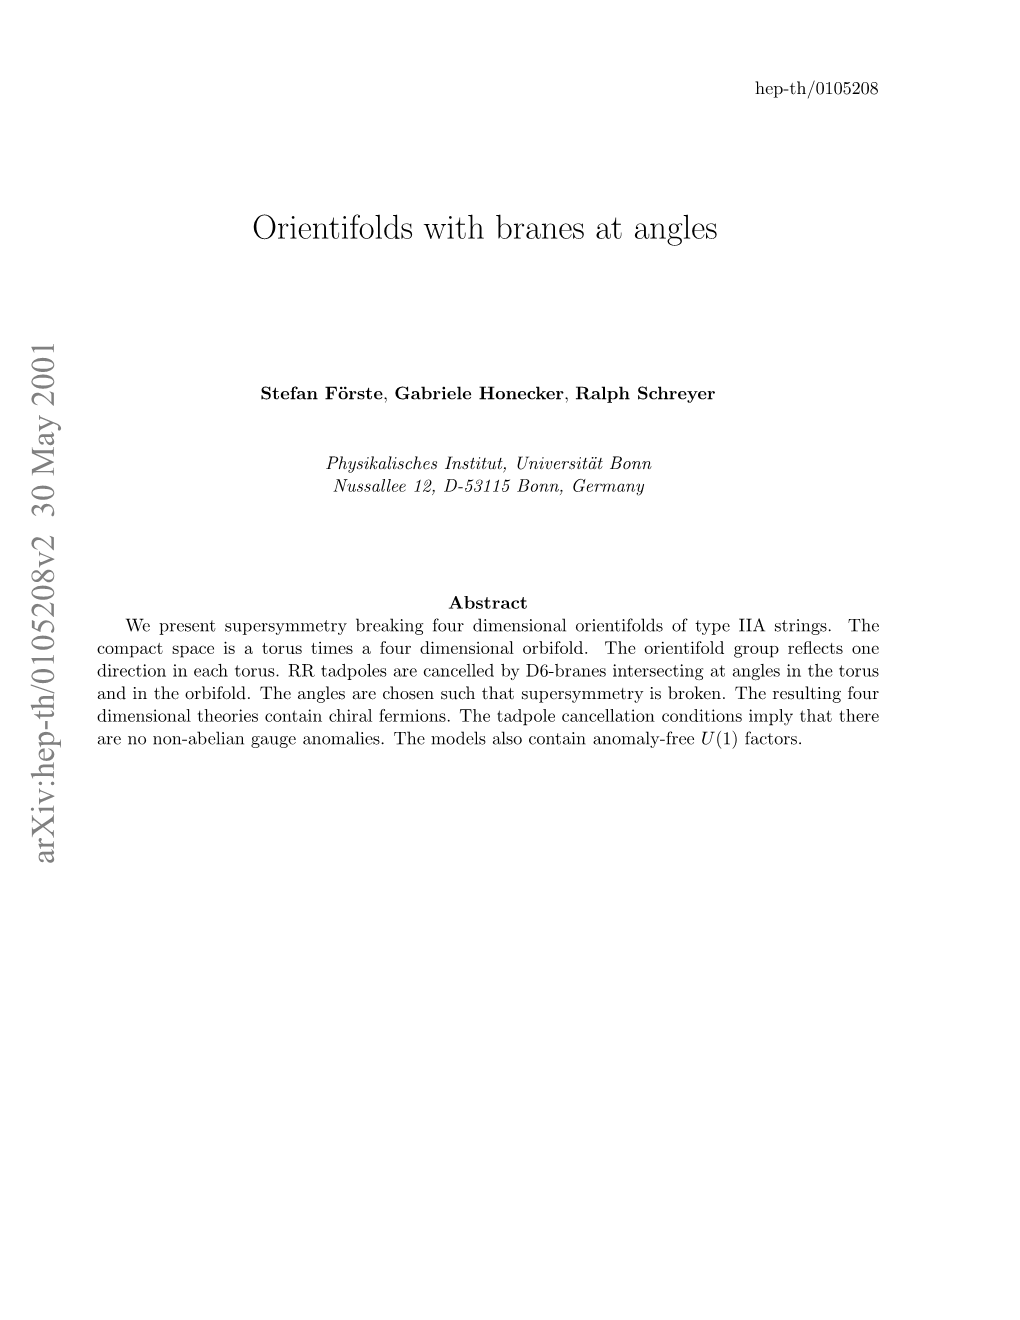 Orientifolds with Branes at Angles